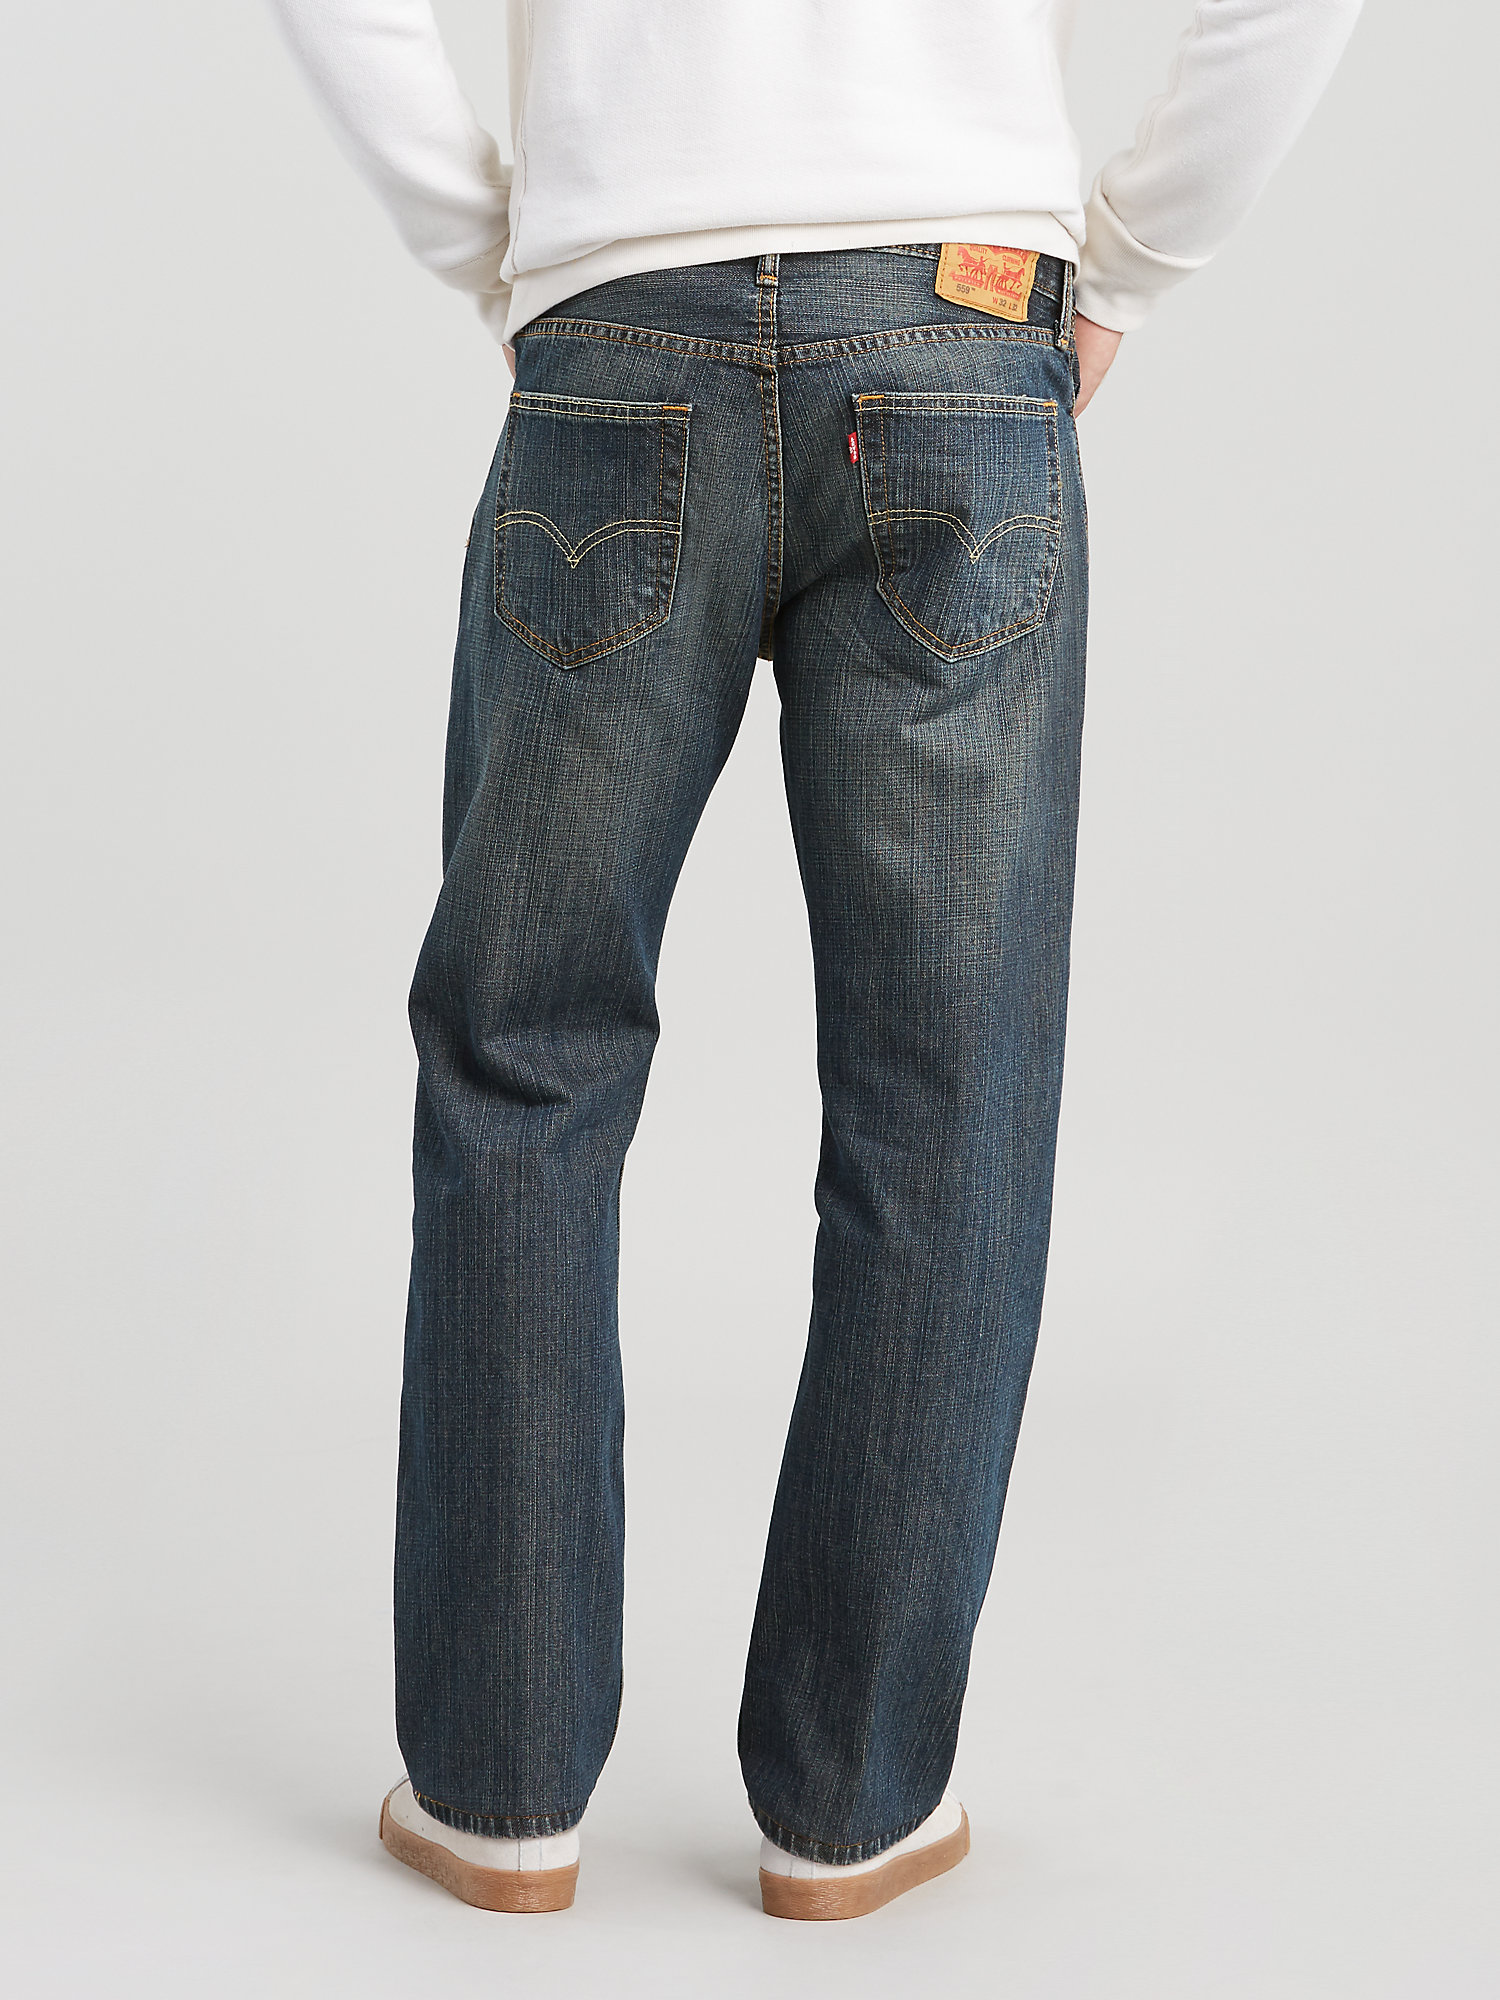 Levi's Men's Big & Tall 559 Relaxed Straight Jeans - image 5 of 6